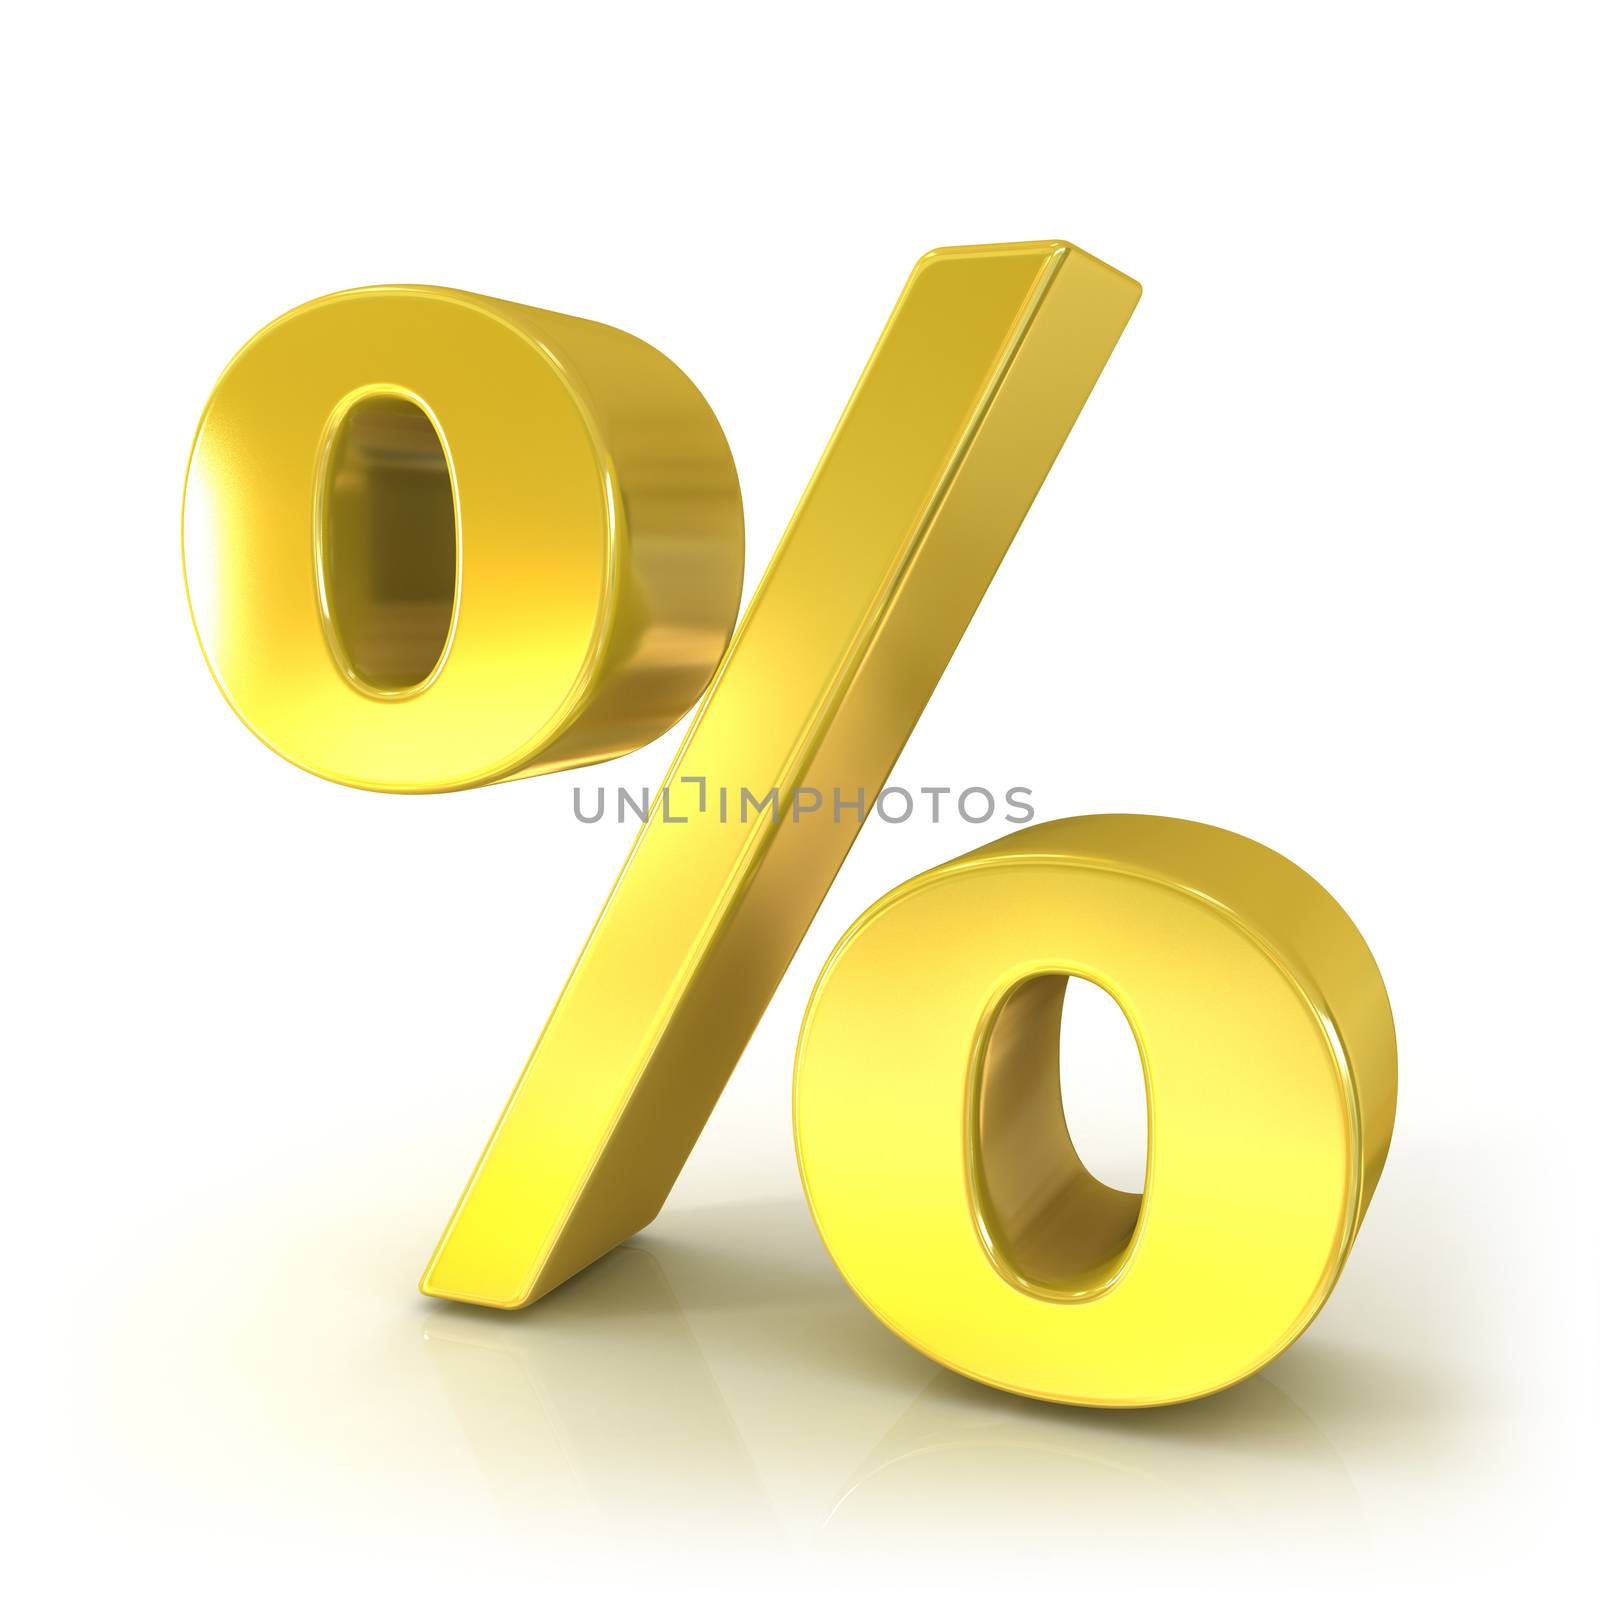 Percent 3D golden sign isolated on white background